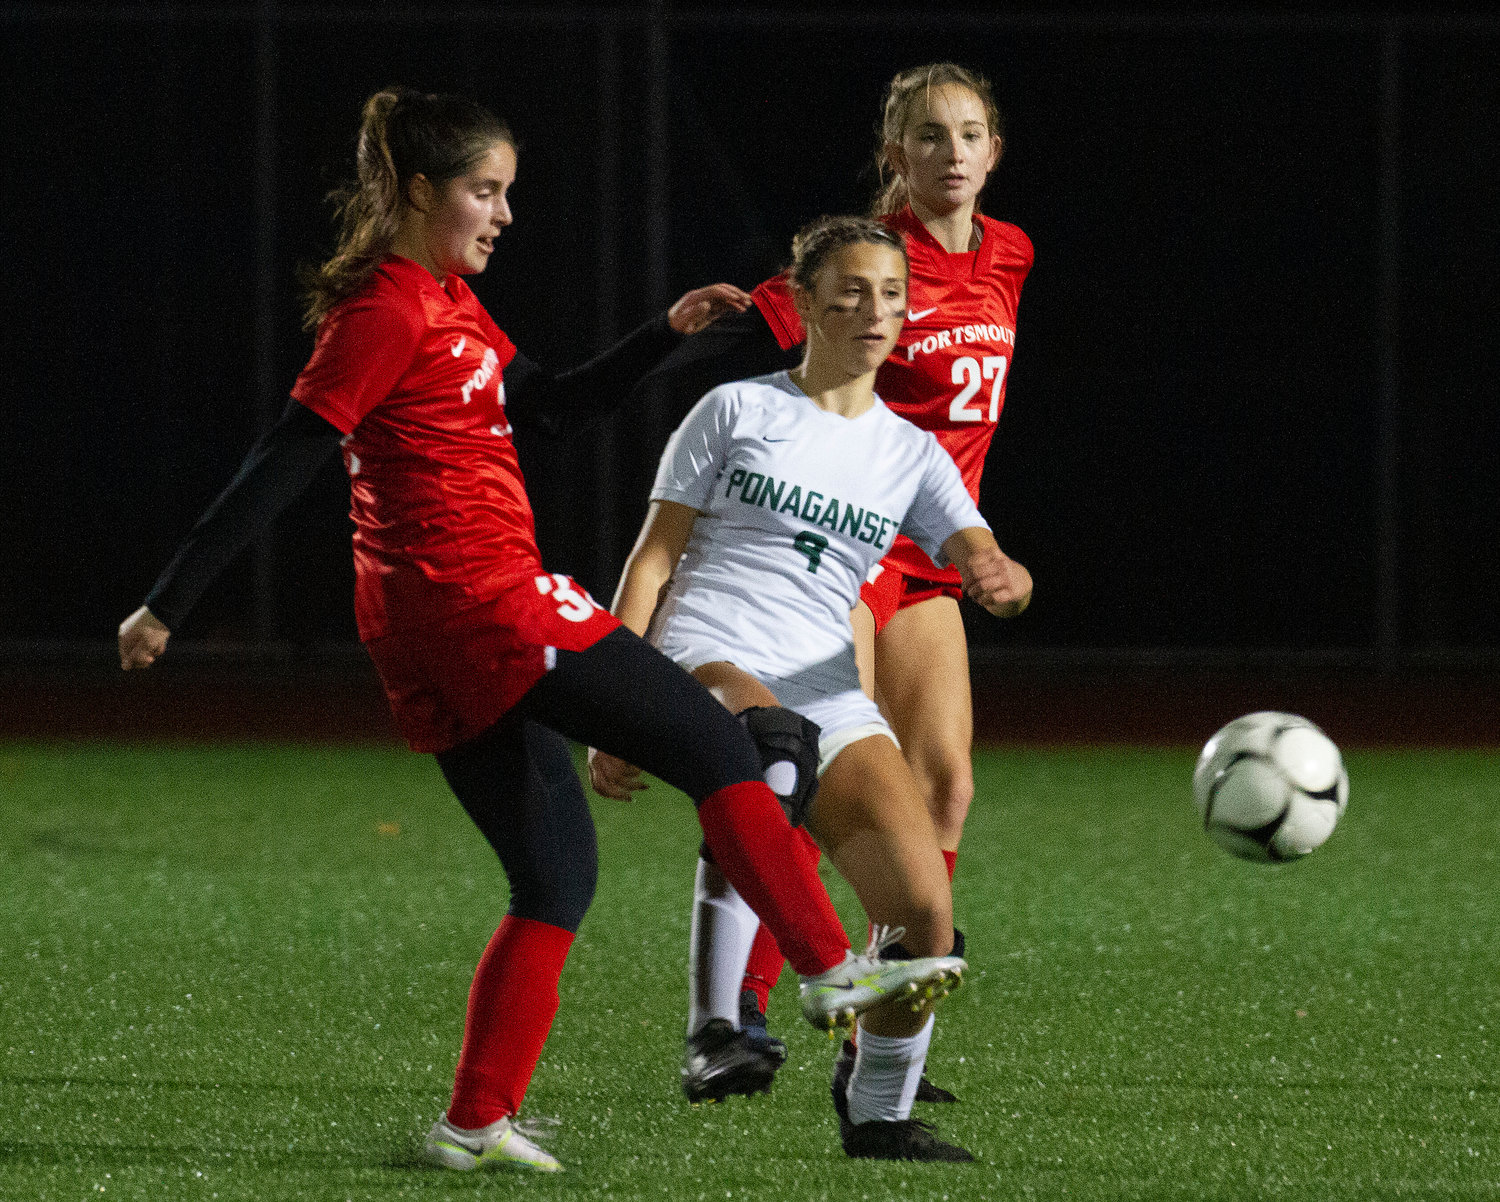 Evelyn Shuster (left) vies for a throw-in as teammate Alexandra Kaull looks on.